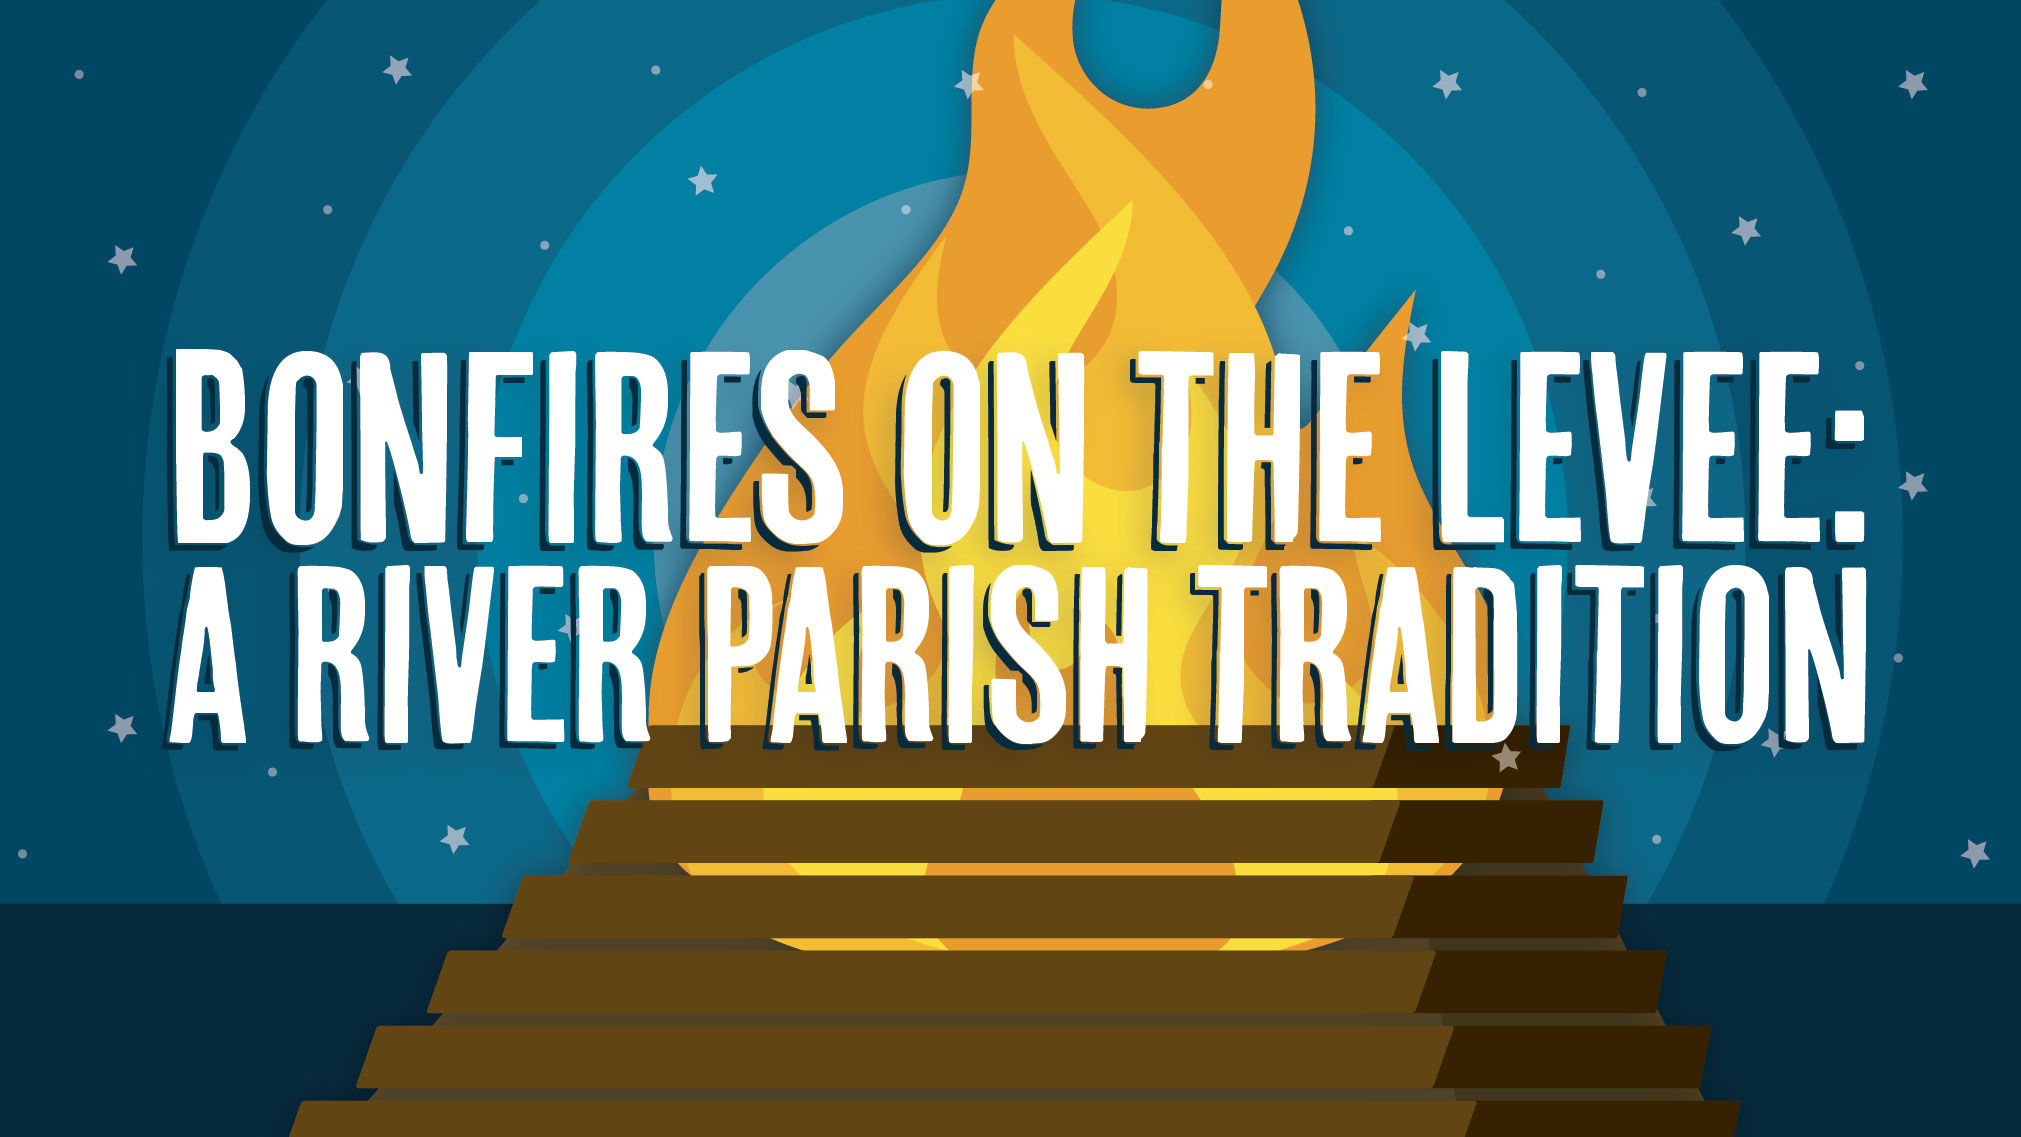 Bonfires on the Levee A River Parish Tradition